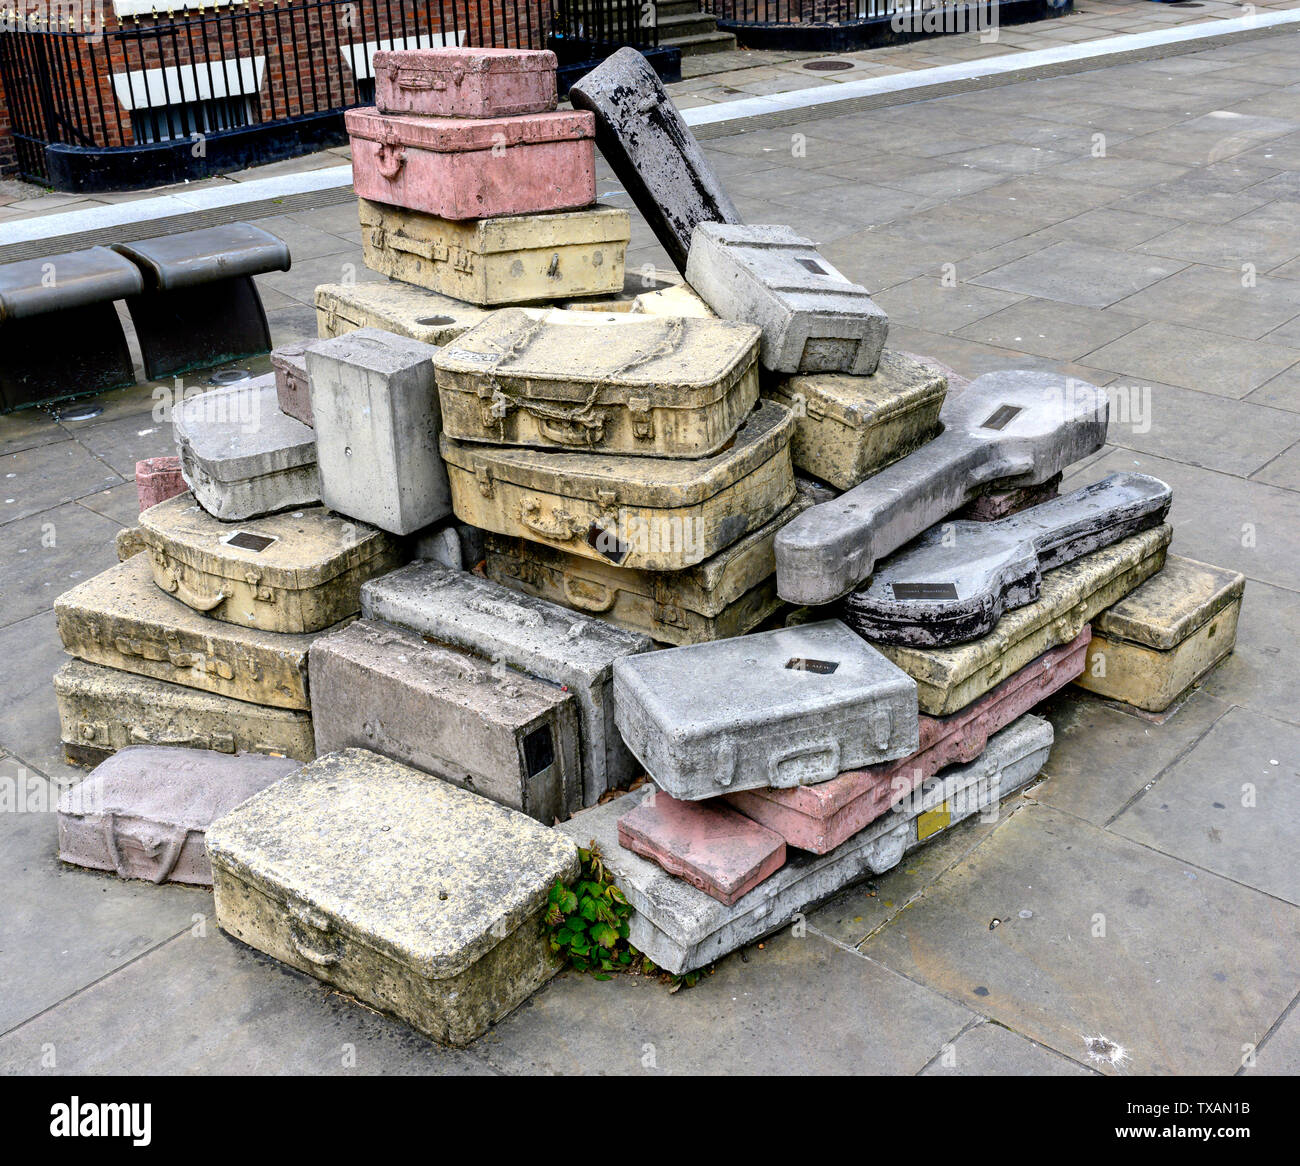 Concrete art in the form of luggage situated at junction of Hope Street and Mount Street, Liverpool, England, UK. Stock Photo